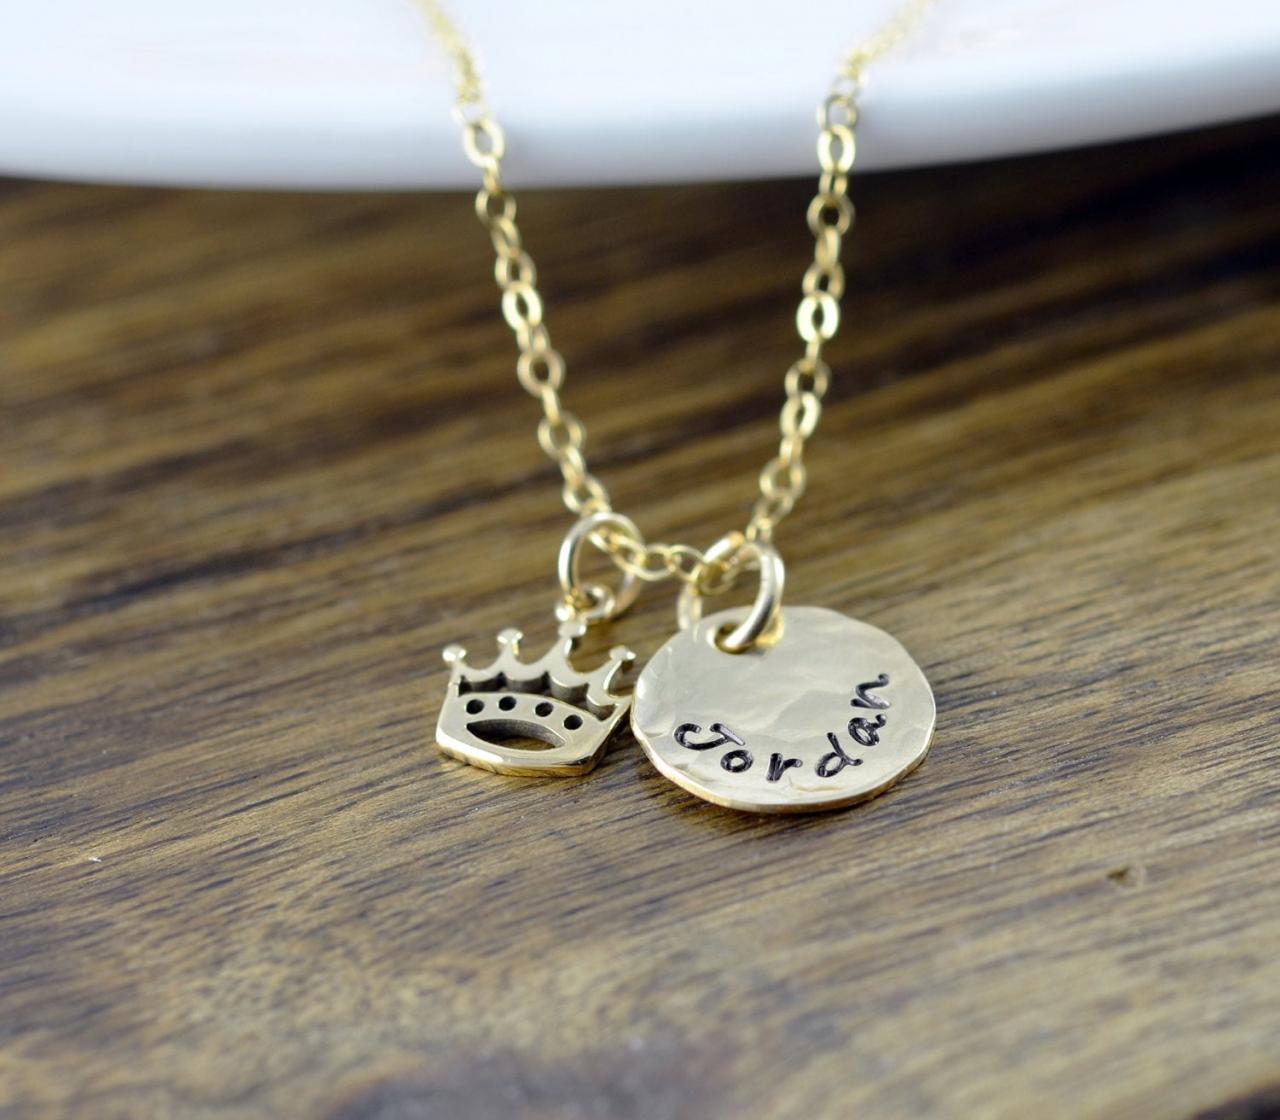 Crown Necklace, Royal Crown Charm, Personalized, Name Necklace, Stamped Name, Monogram Name, Gold Crown Necklace, Hand Stamped Necklace